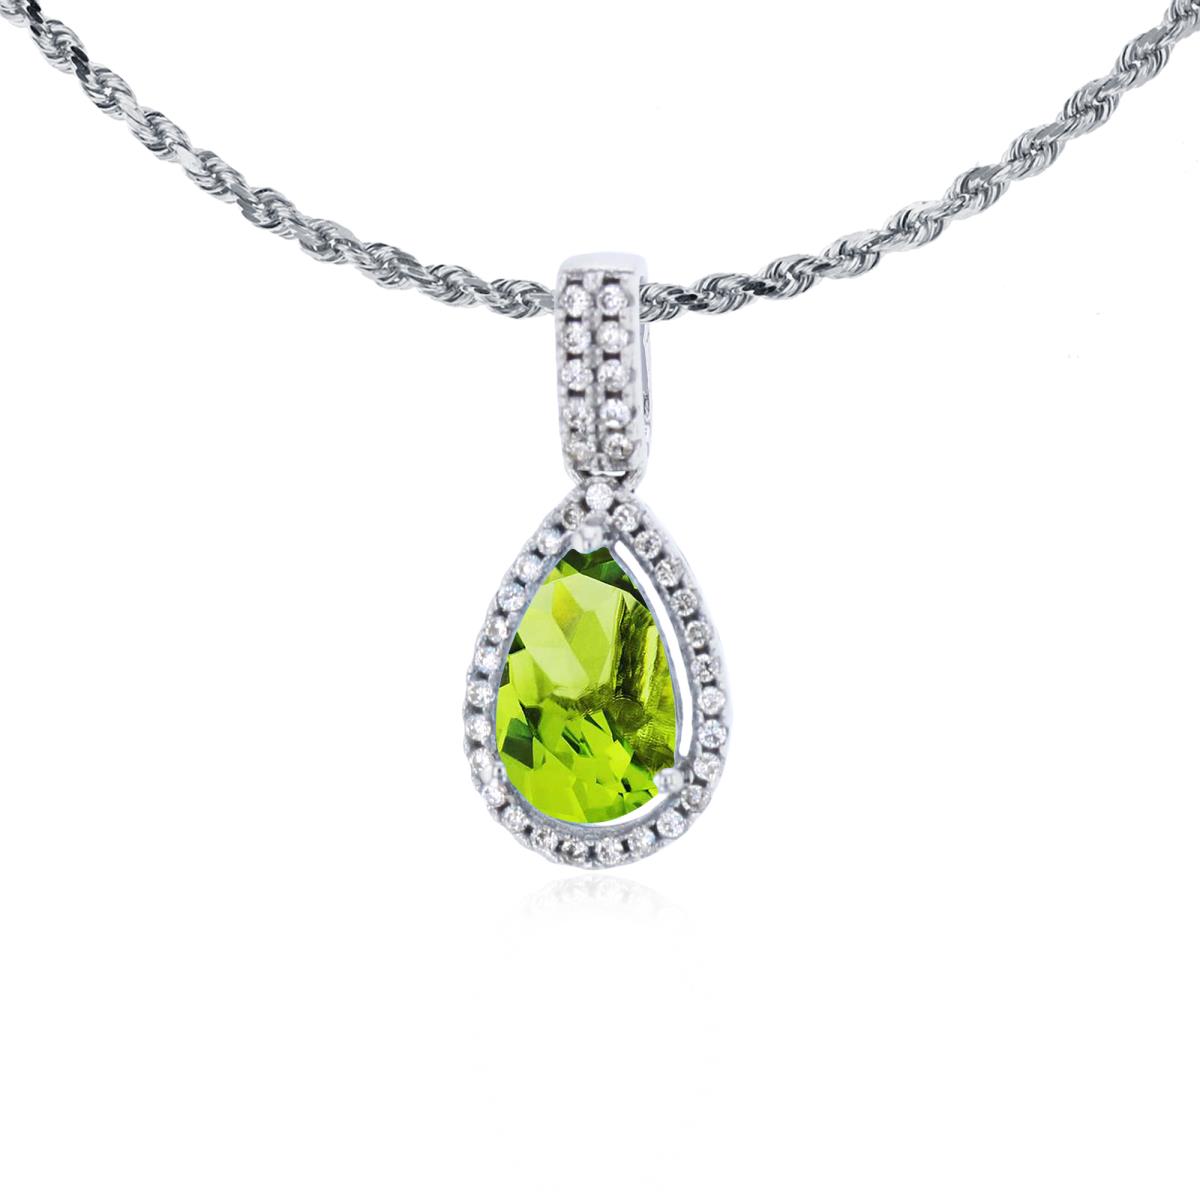 10K White Gold 8x5mm Pear Cut Peridot & 0.11 CTTW Diamond Halo 18" Rope Chain Necklace